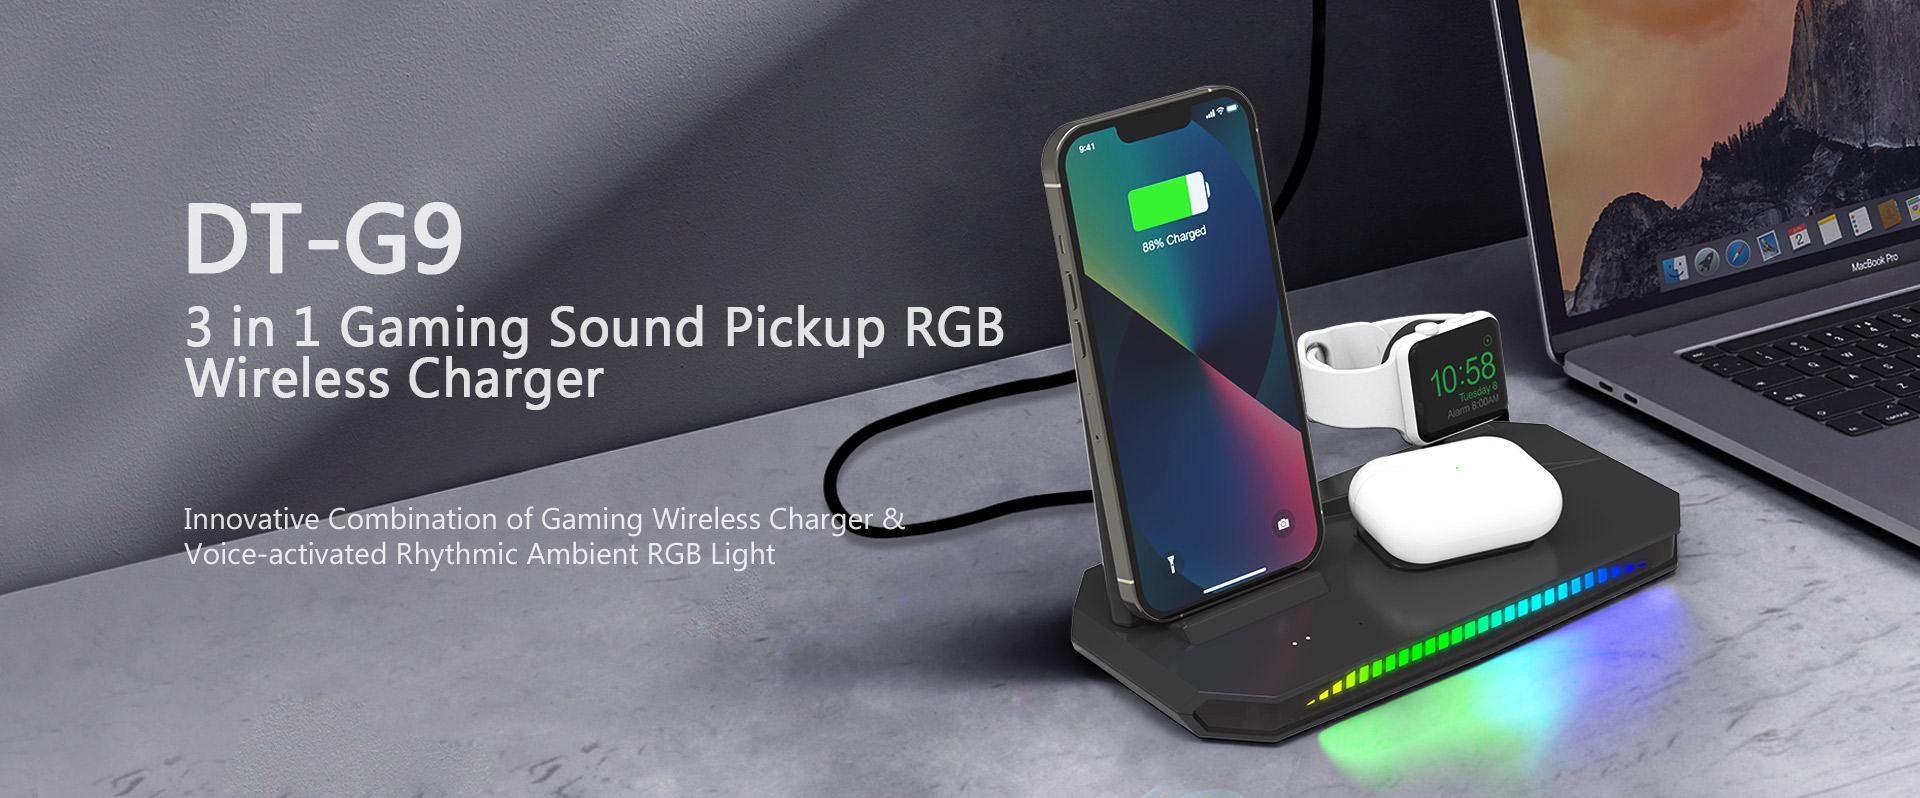 3 in 1 Gaming Sound Pickup RGB Wireless Charger